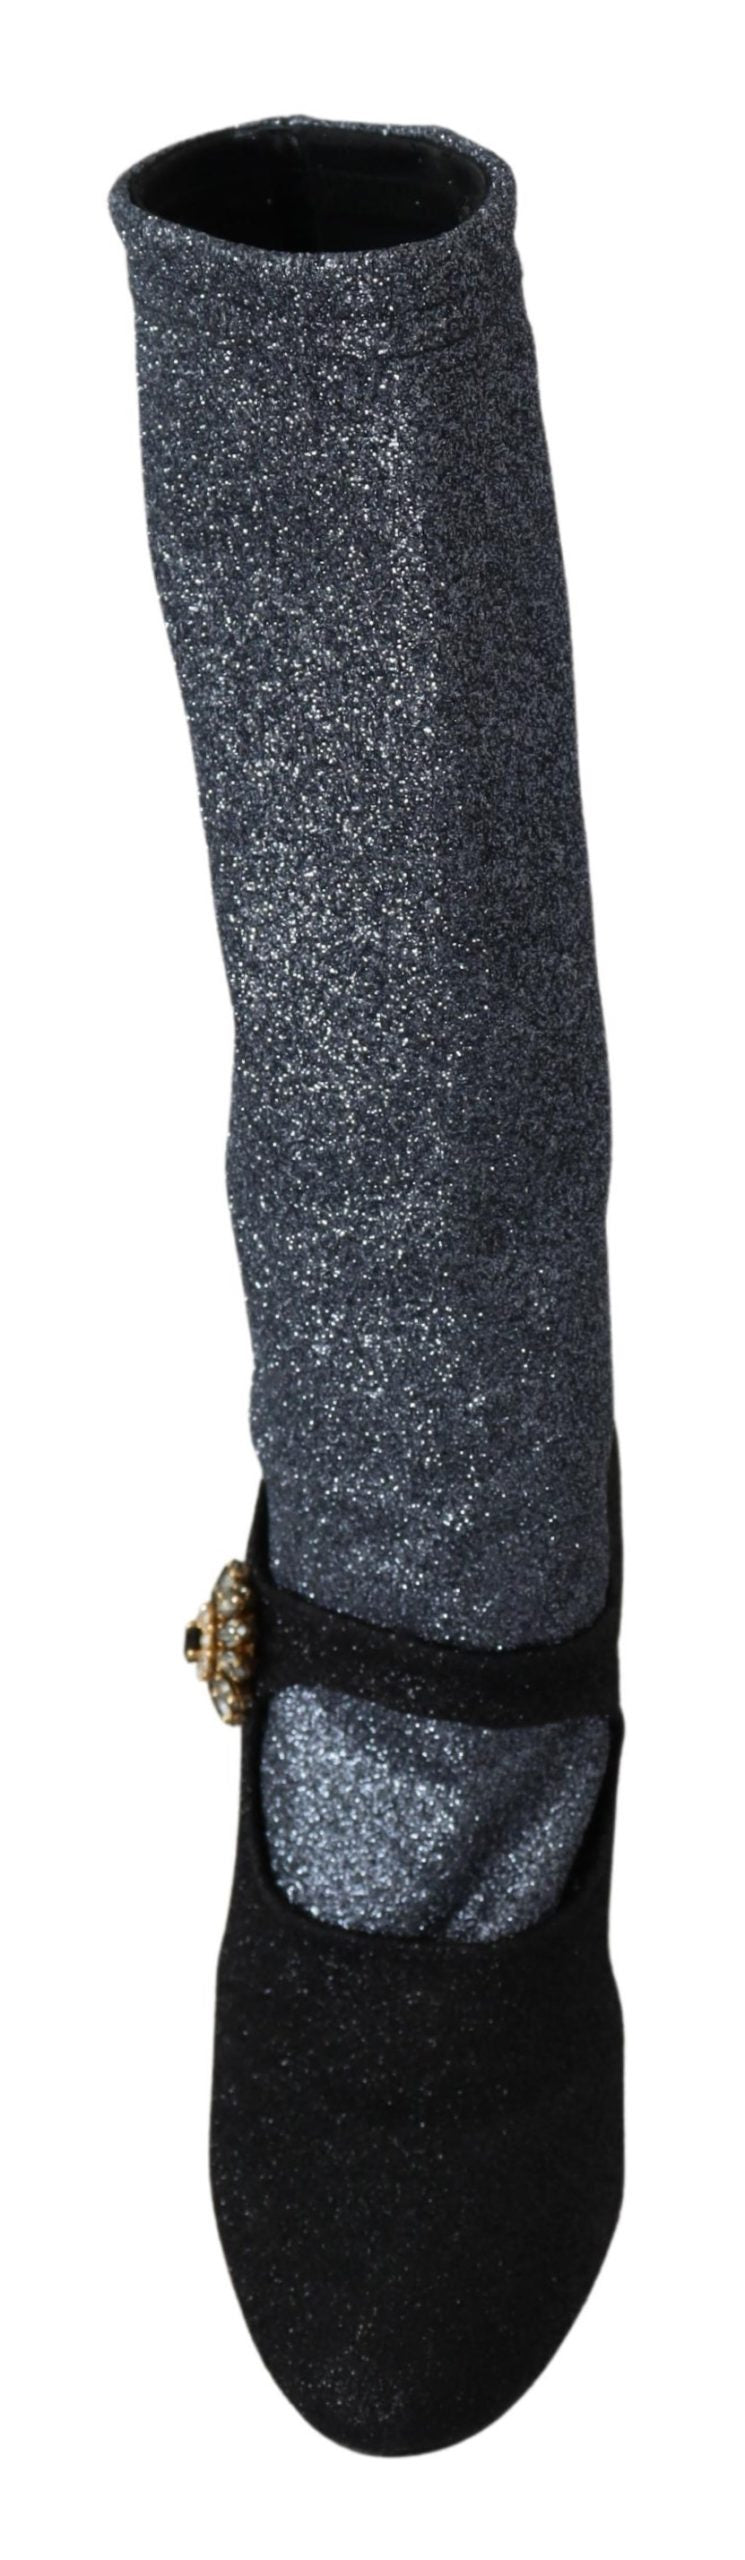 Black Crystal Glitter Boots Shoes